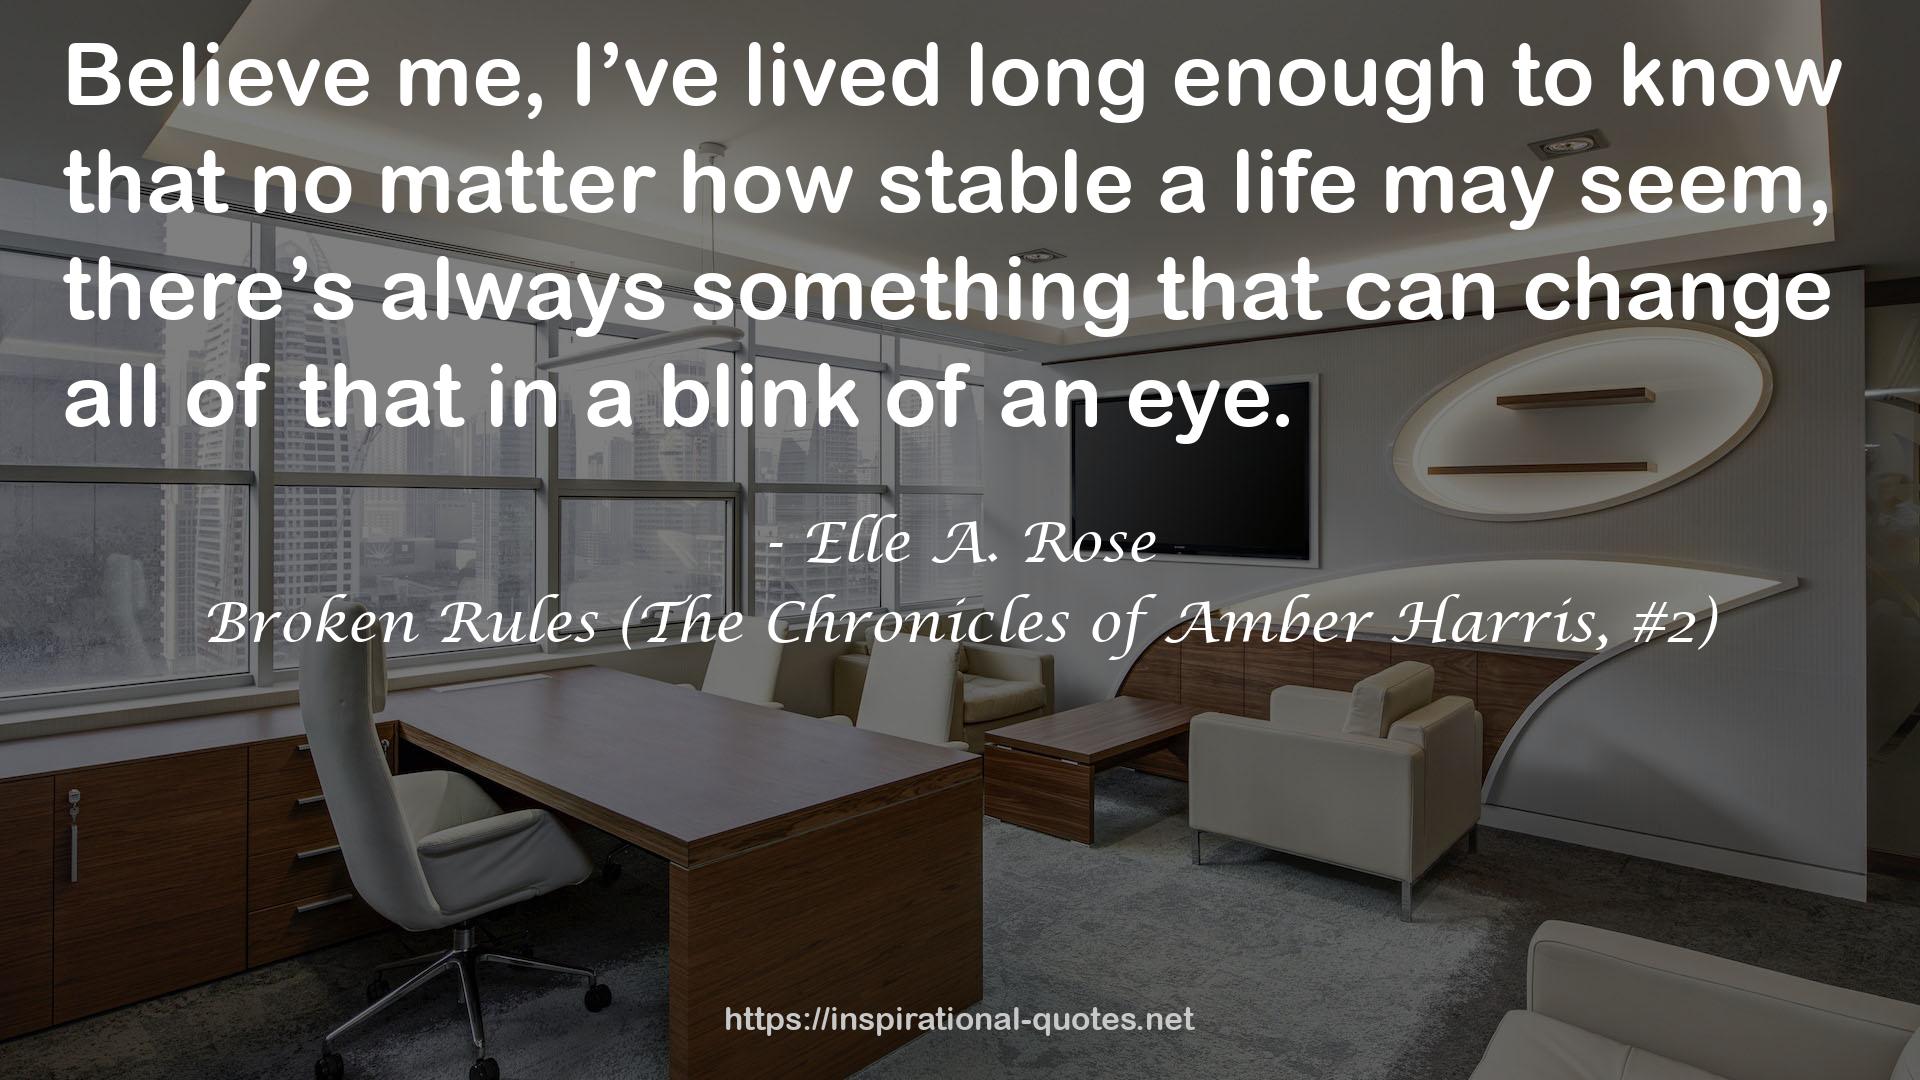 Broken Rules (The Chronicles of Amber Harris, #2) QUOTES